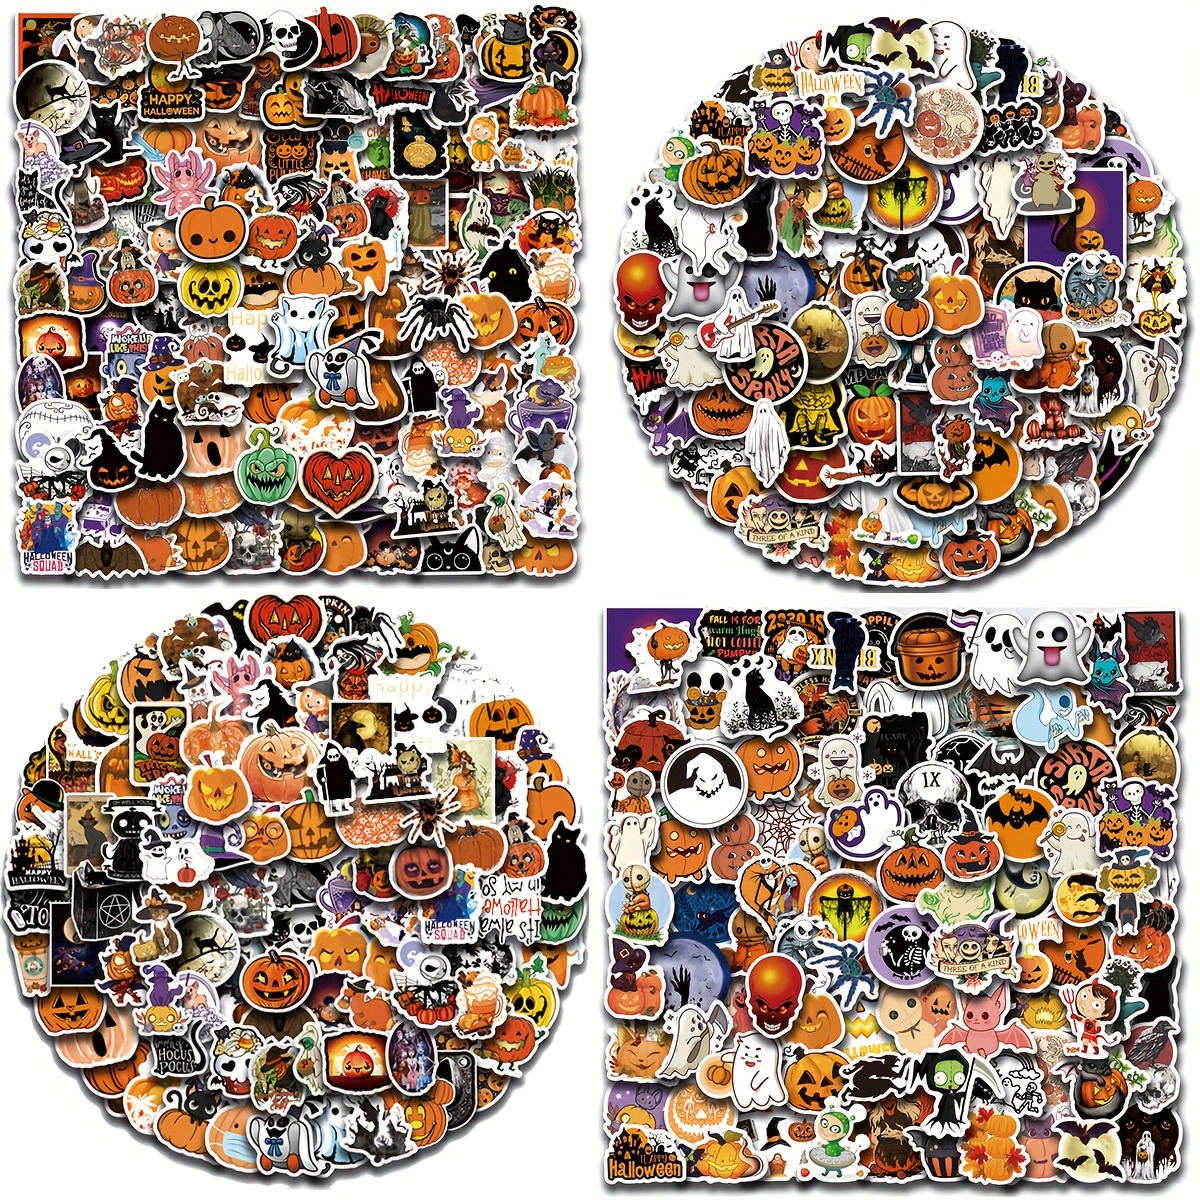 Sticker Bomb Pack Vinyl Wrap 100 Pcs,Funny Stickers Packs for  Adults,Cars,Motorcycle,Bicycle,Skateboard,Luggage[Not Random] 